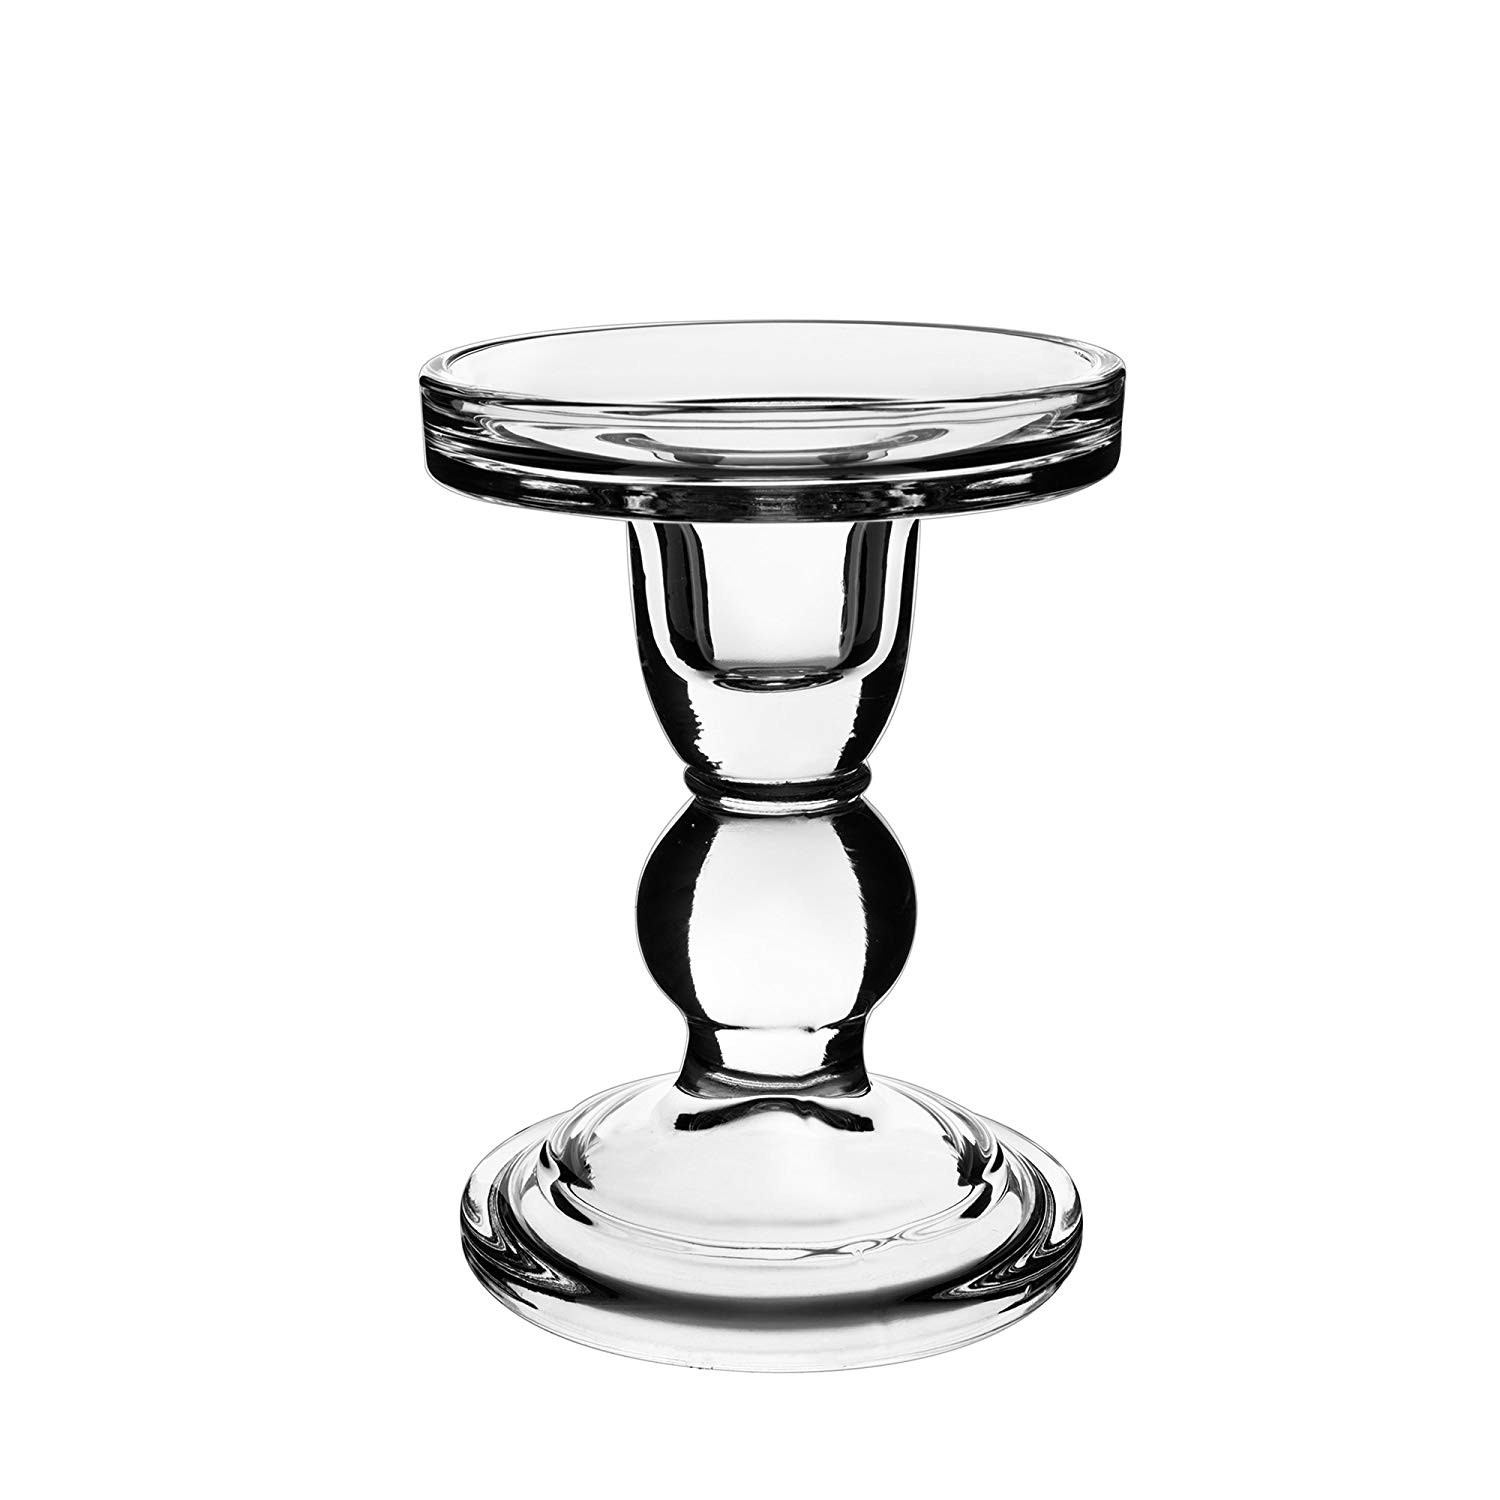 26 Recommended Mercury Glass Pedestal Vase 2024 free download mercury glass pedestal vase of amazon com cys excel candle holder set pillar taper candles bubble pertaining to amazon com cys excel candle holder set pillar taper candles bubble set of 3 pc